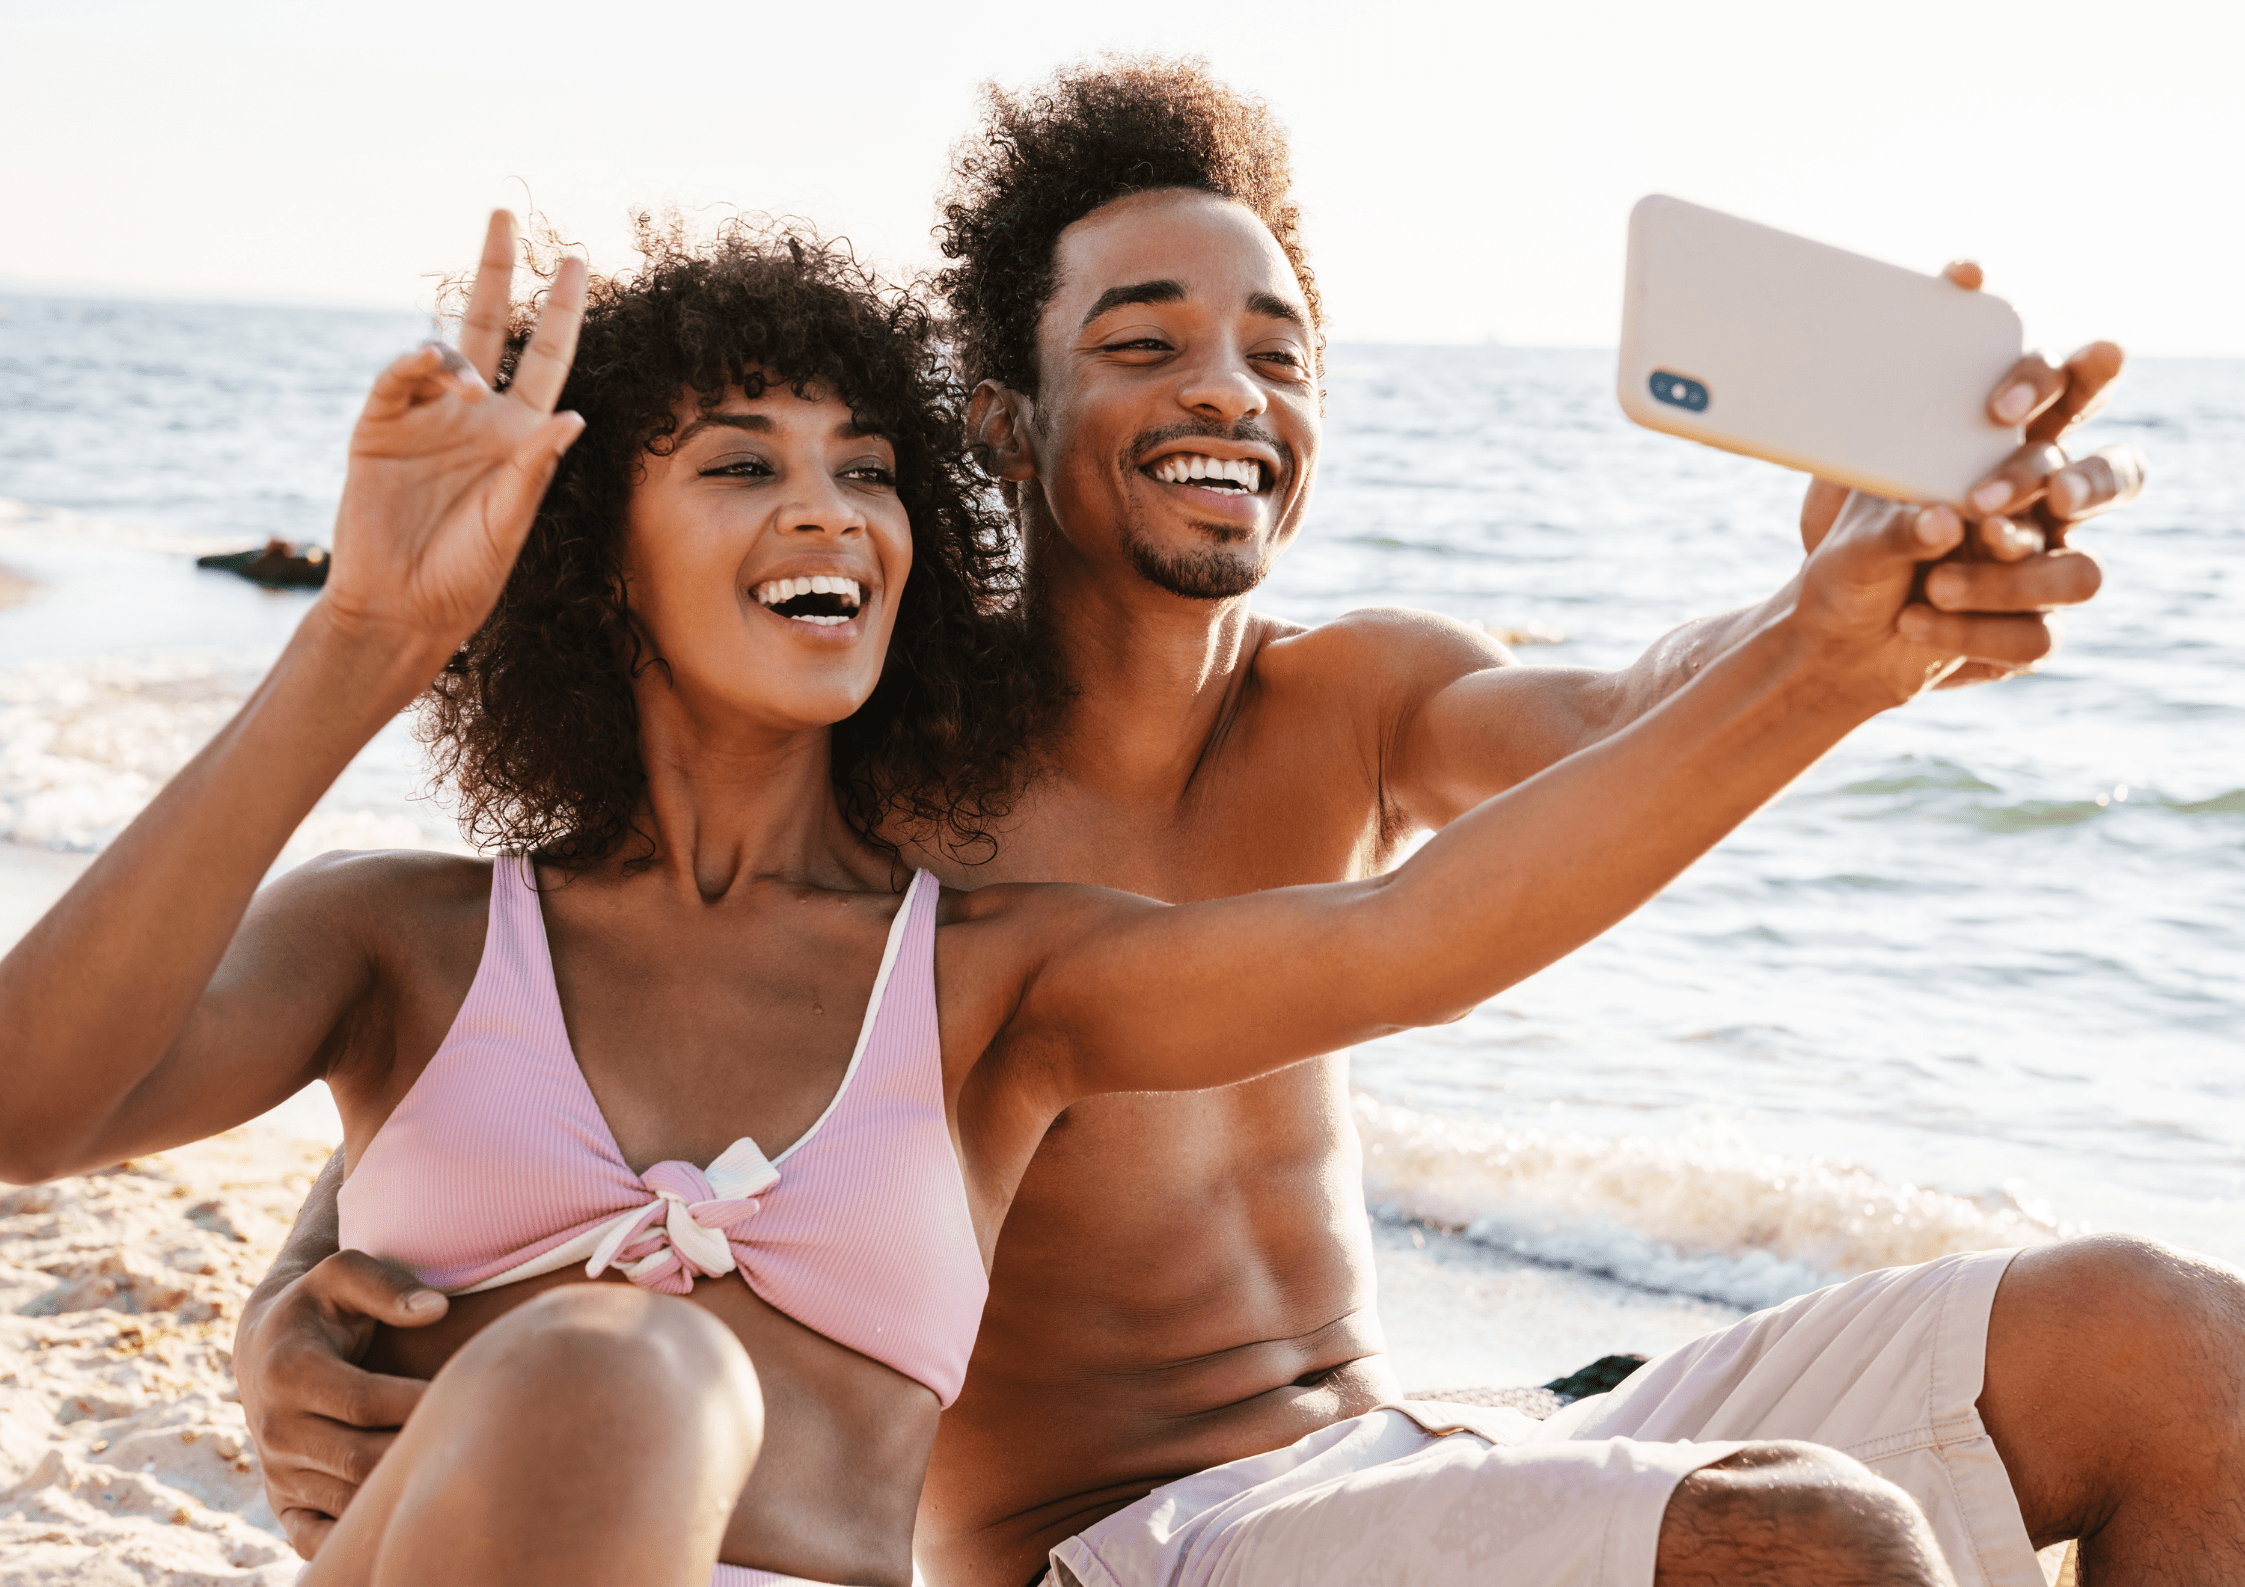 Man and woman on the beach are taking a selfie